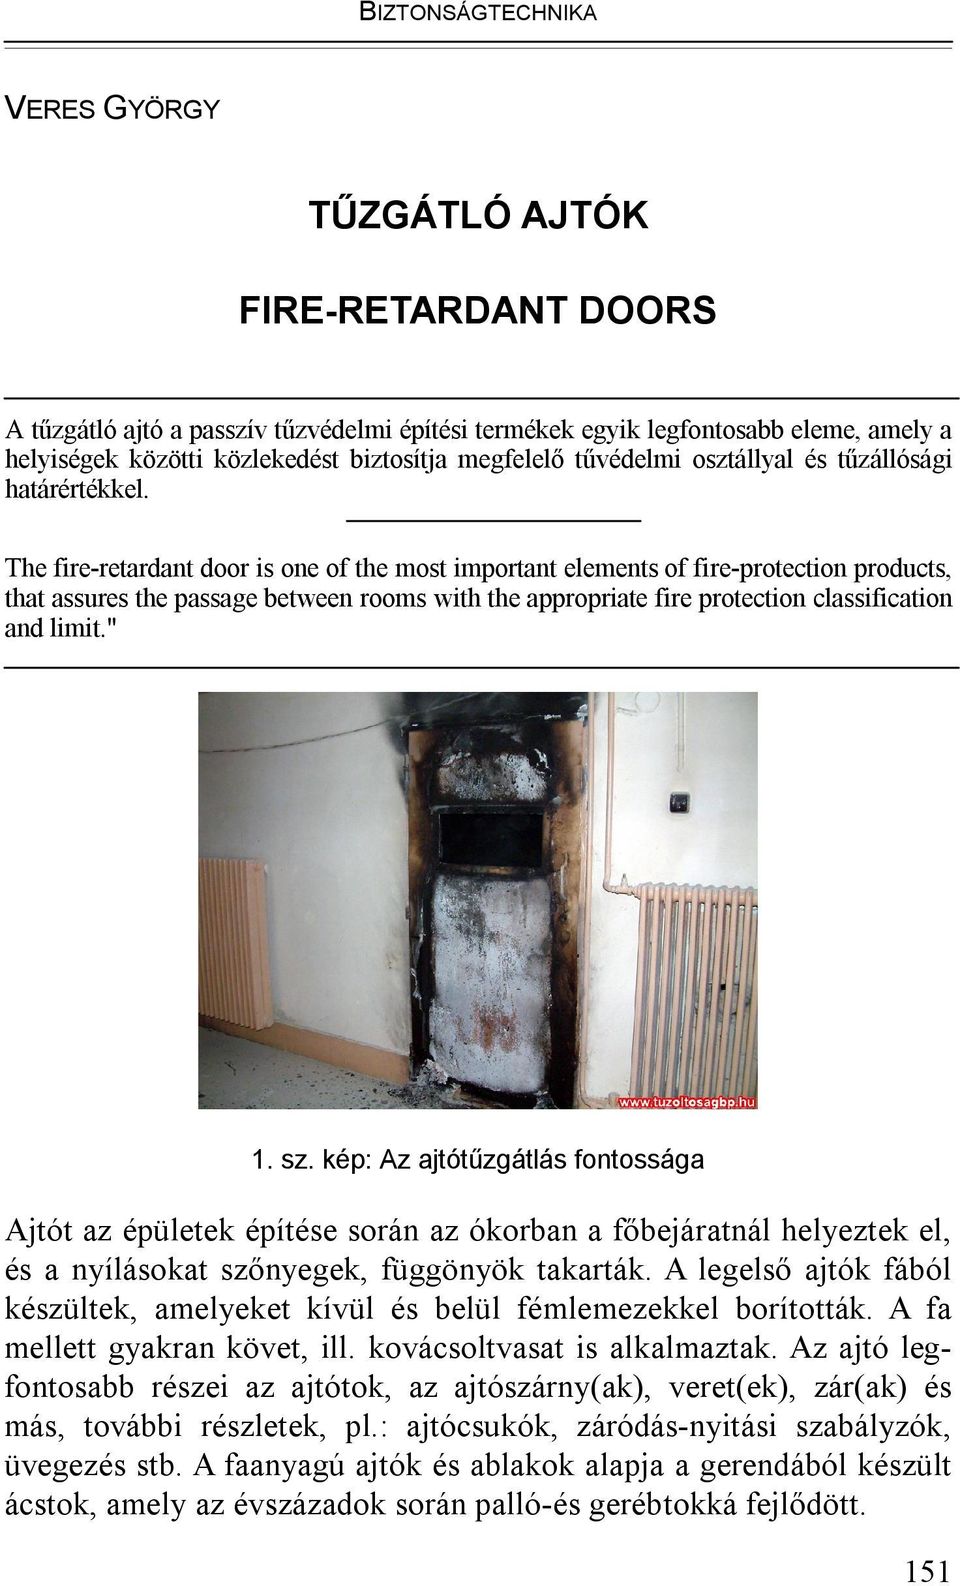 The fire-retardant door is one of the most important elements of fire-protection products, that assures the passage between rooms with the appropriate fire protection classification and limit." 1. sz.